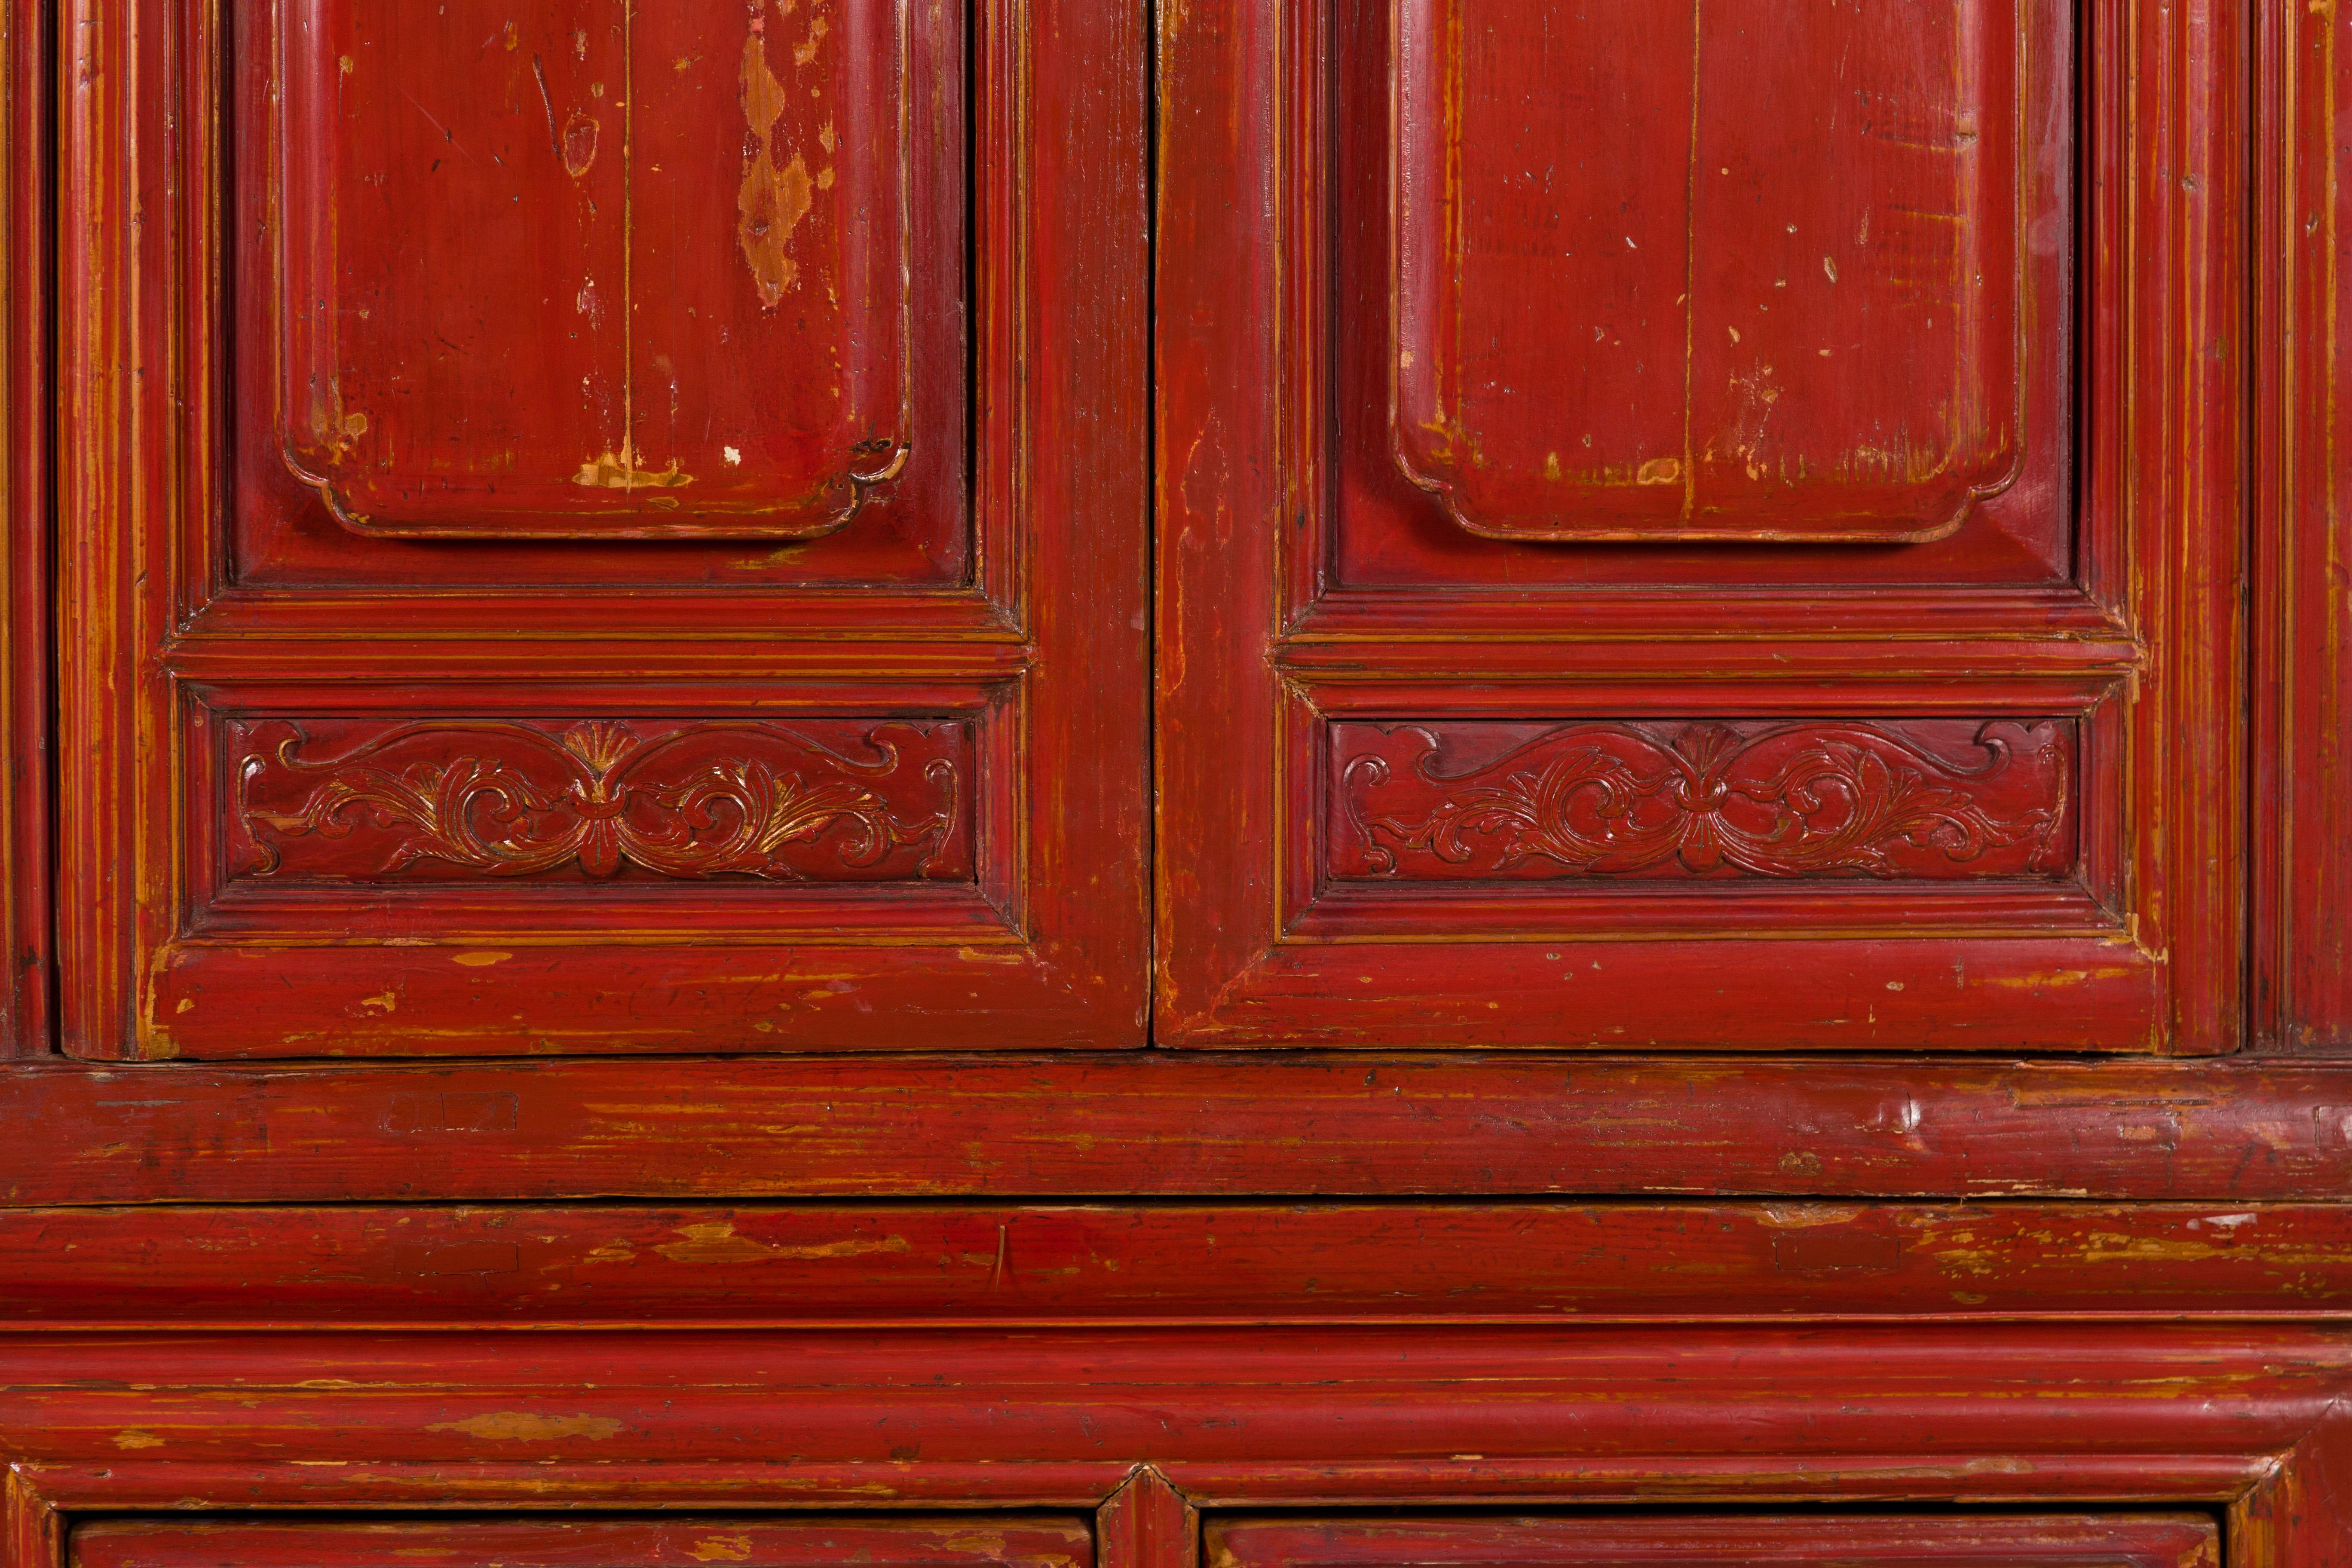 Late Qing Dynasty Period Chinese Red Lacquer Compound Cabinet with Raised Panels For Sale 1